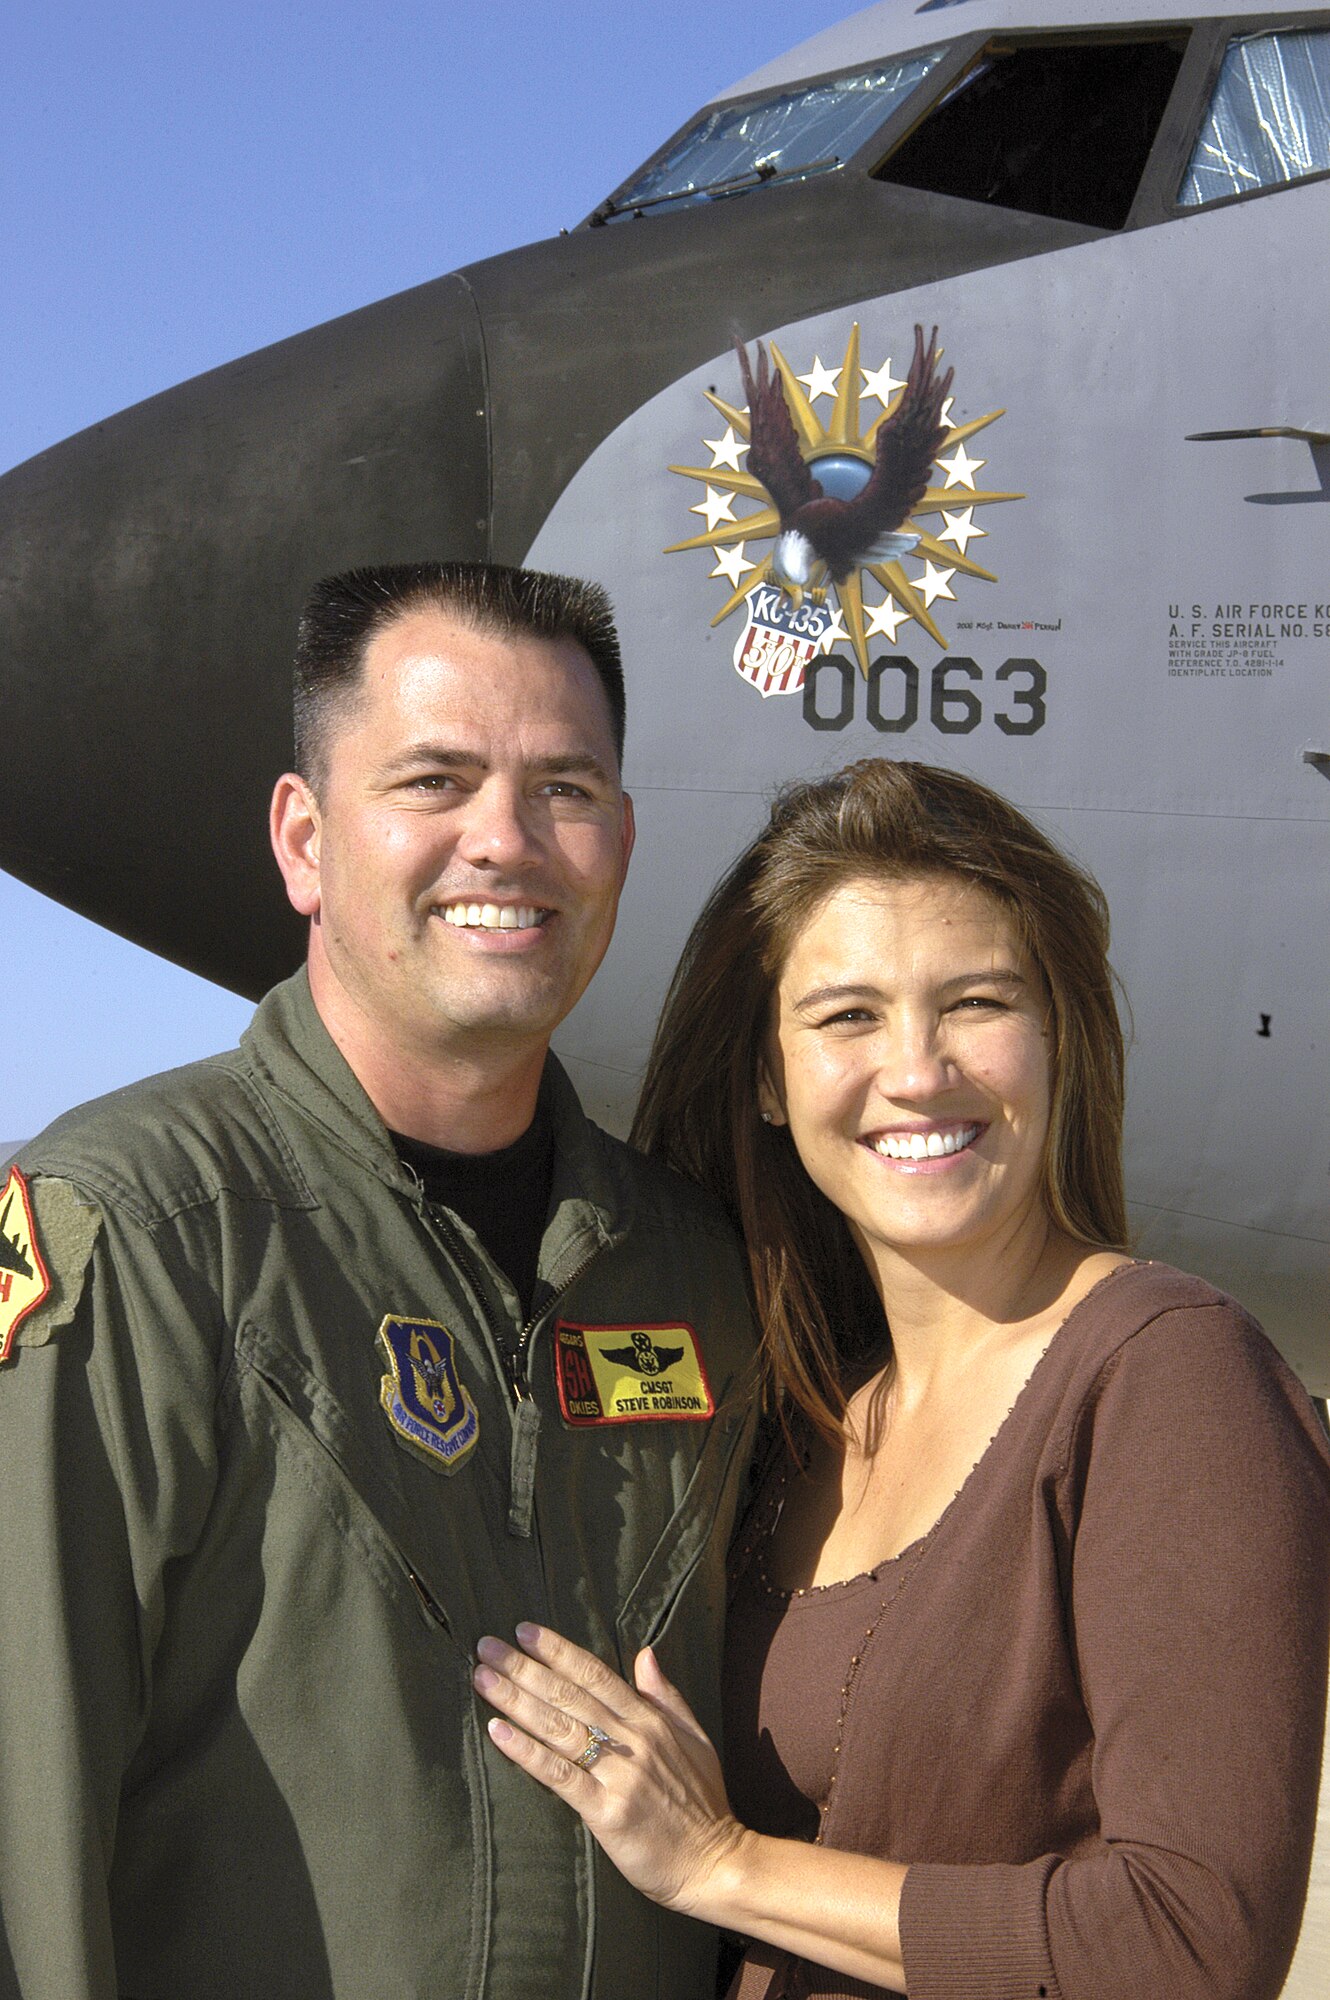 Chief Master Sgt. Steven Robinson and his wife Justine said "I do" aboard a KC-135 Stratotanker 15 years ago. Today, in front of the familiar aircraft with special 50th anniversary nose art, they reminisce about their marriage's unconventional beginning. (U.S. Air Force photo/Margo Wright) 

